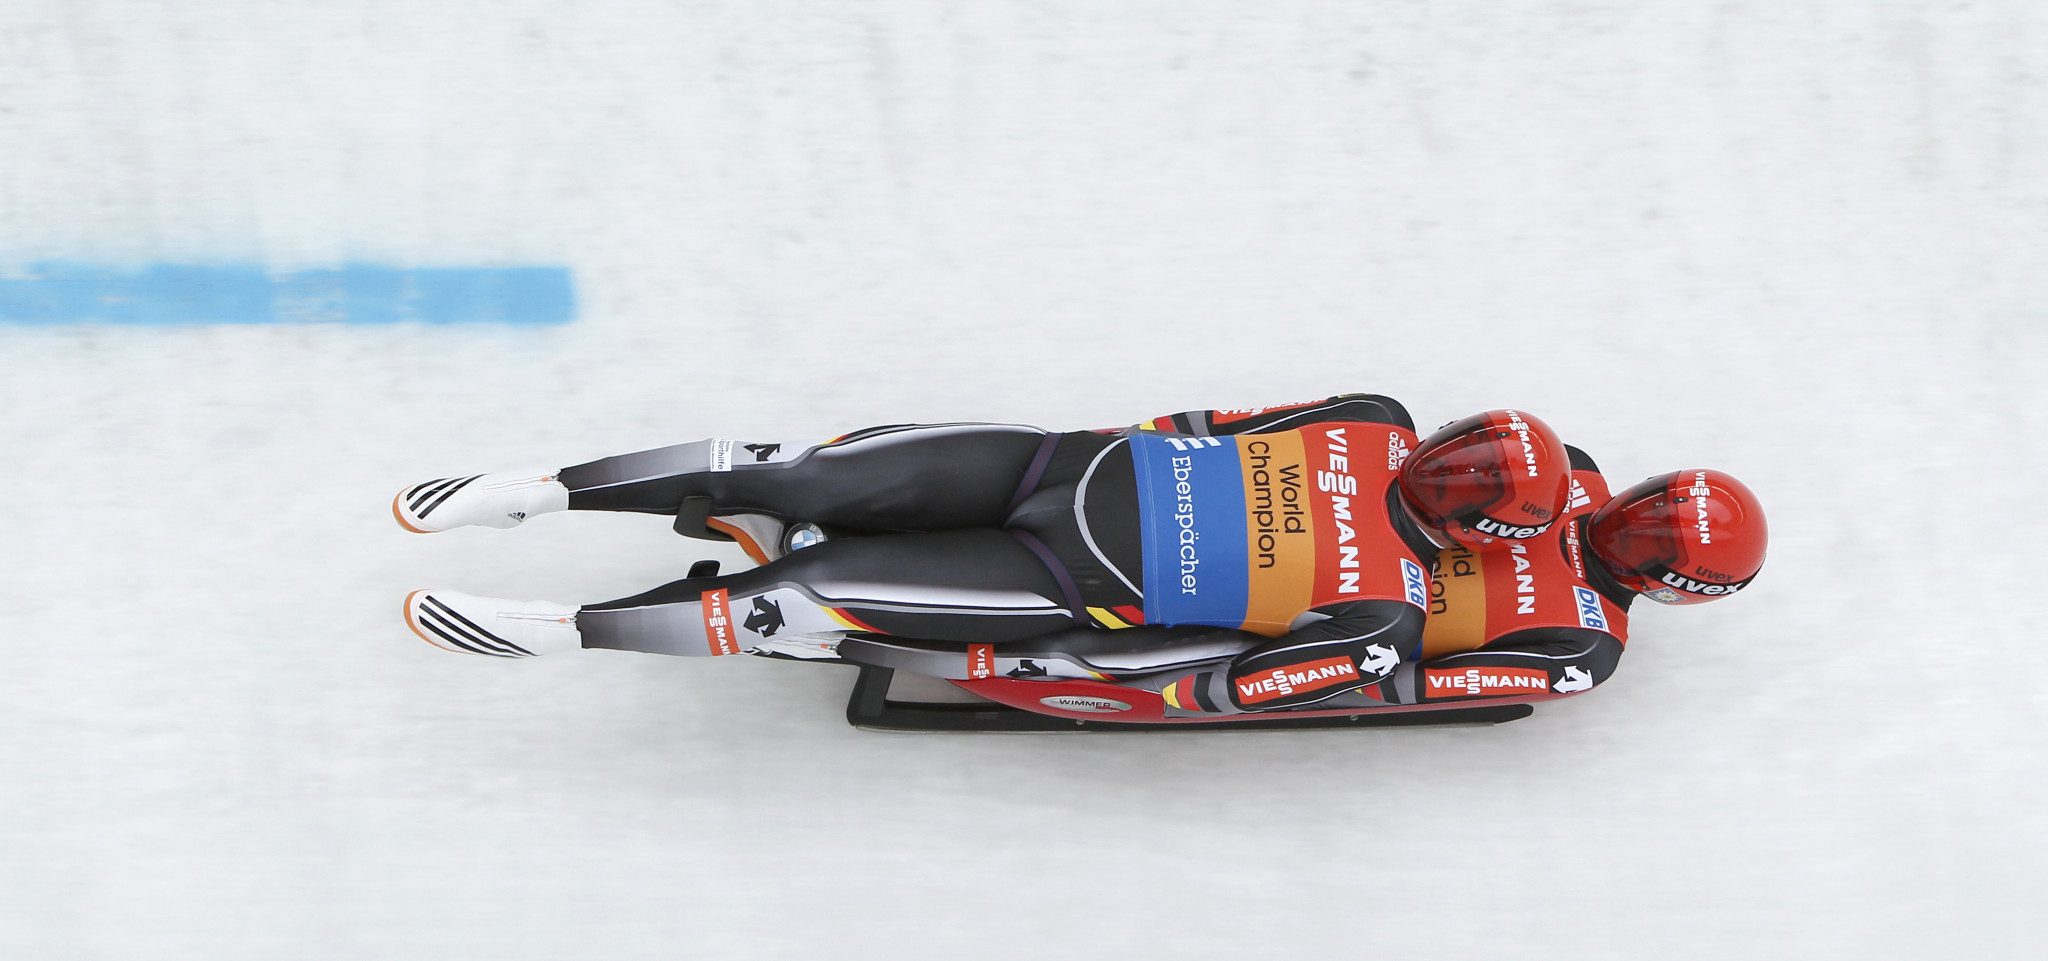 Germany's double Olympic champions Tobias Wendl and Tobias Arlt claimed victory for the first time this season ©Getty Images